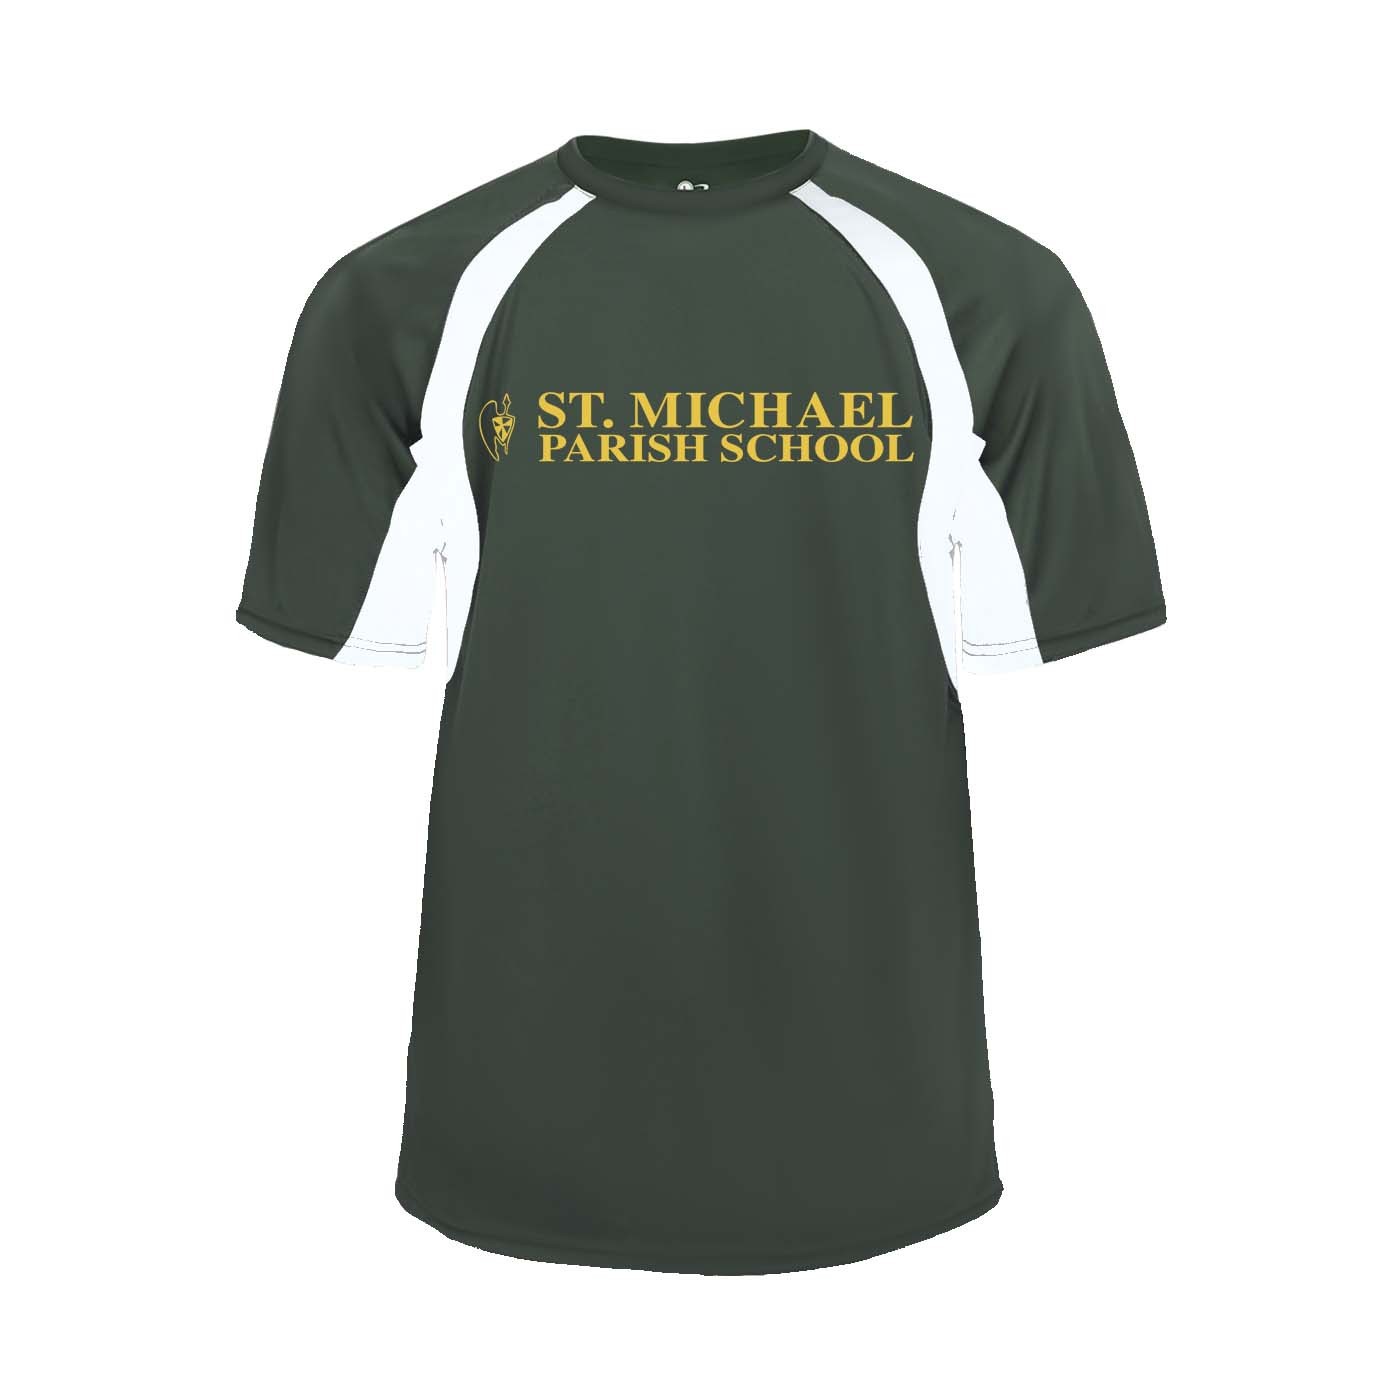 SMSU Spirit Hook S/S T-Shirt w/ Gold Logo #8 - Please Allow 3-4 Weeks for Delivery